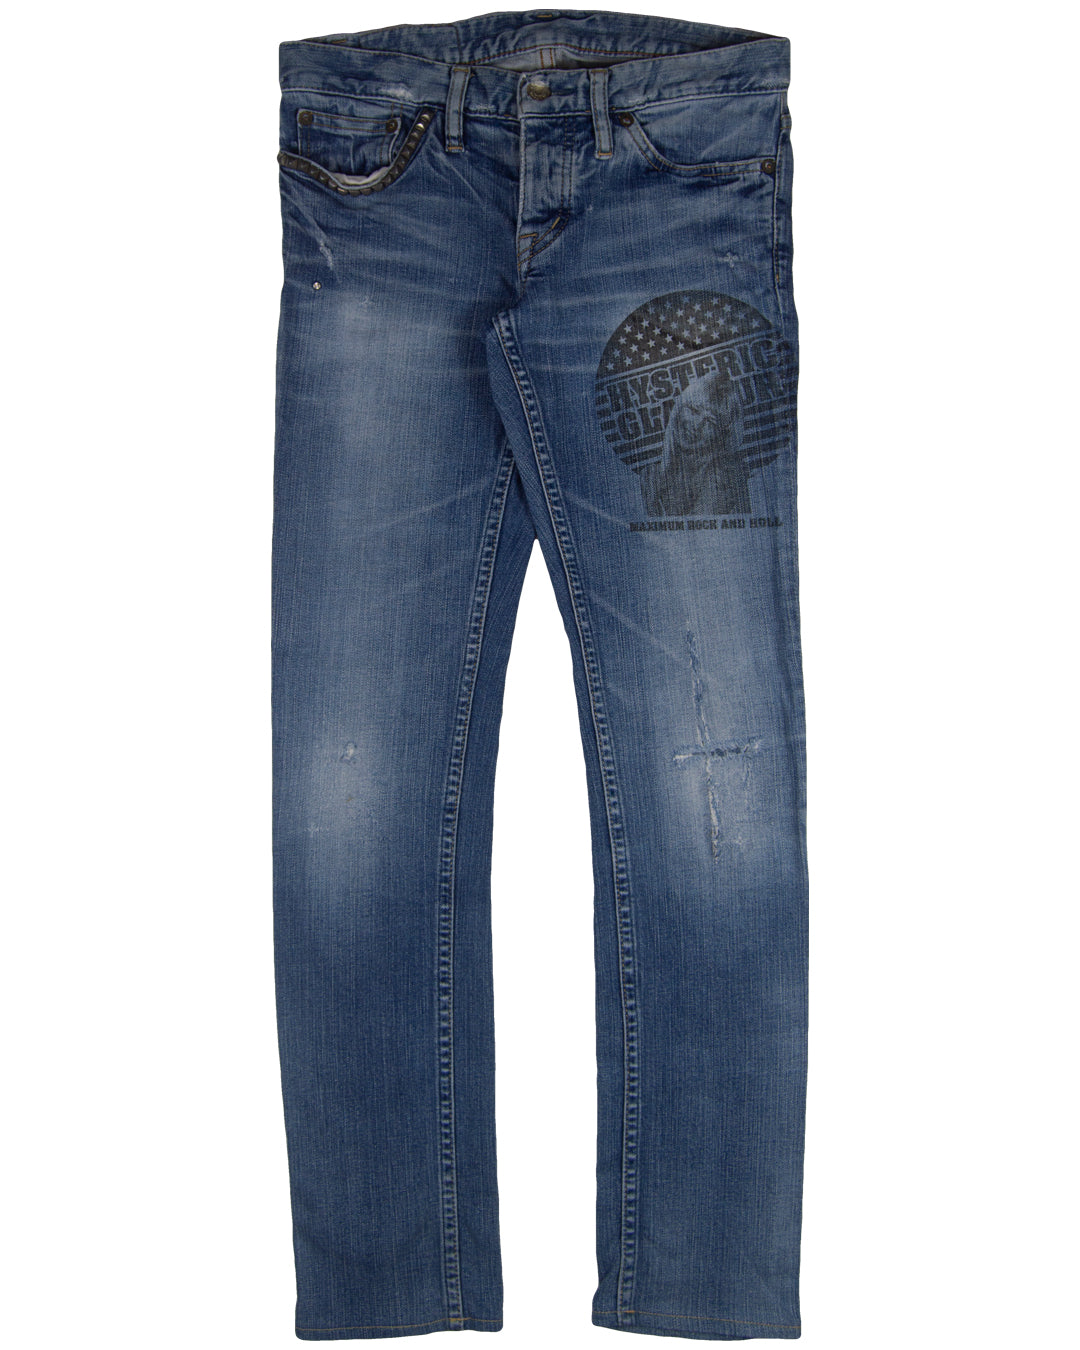 Hysteric Glamour Maximum Rock and Roll Distressed Denim